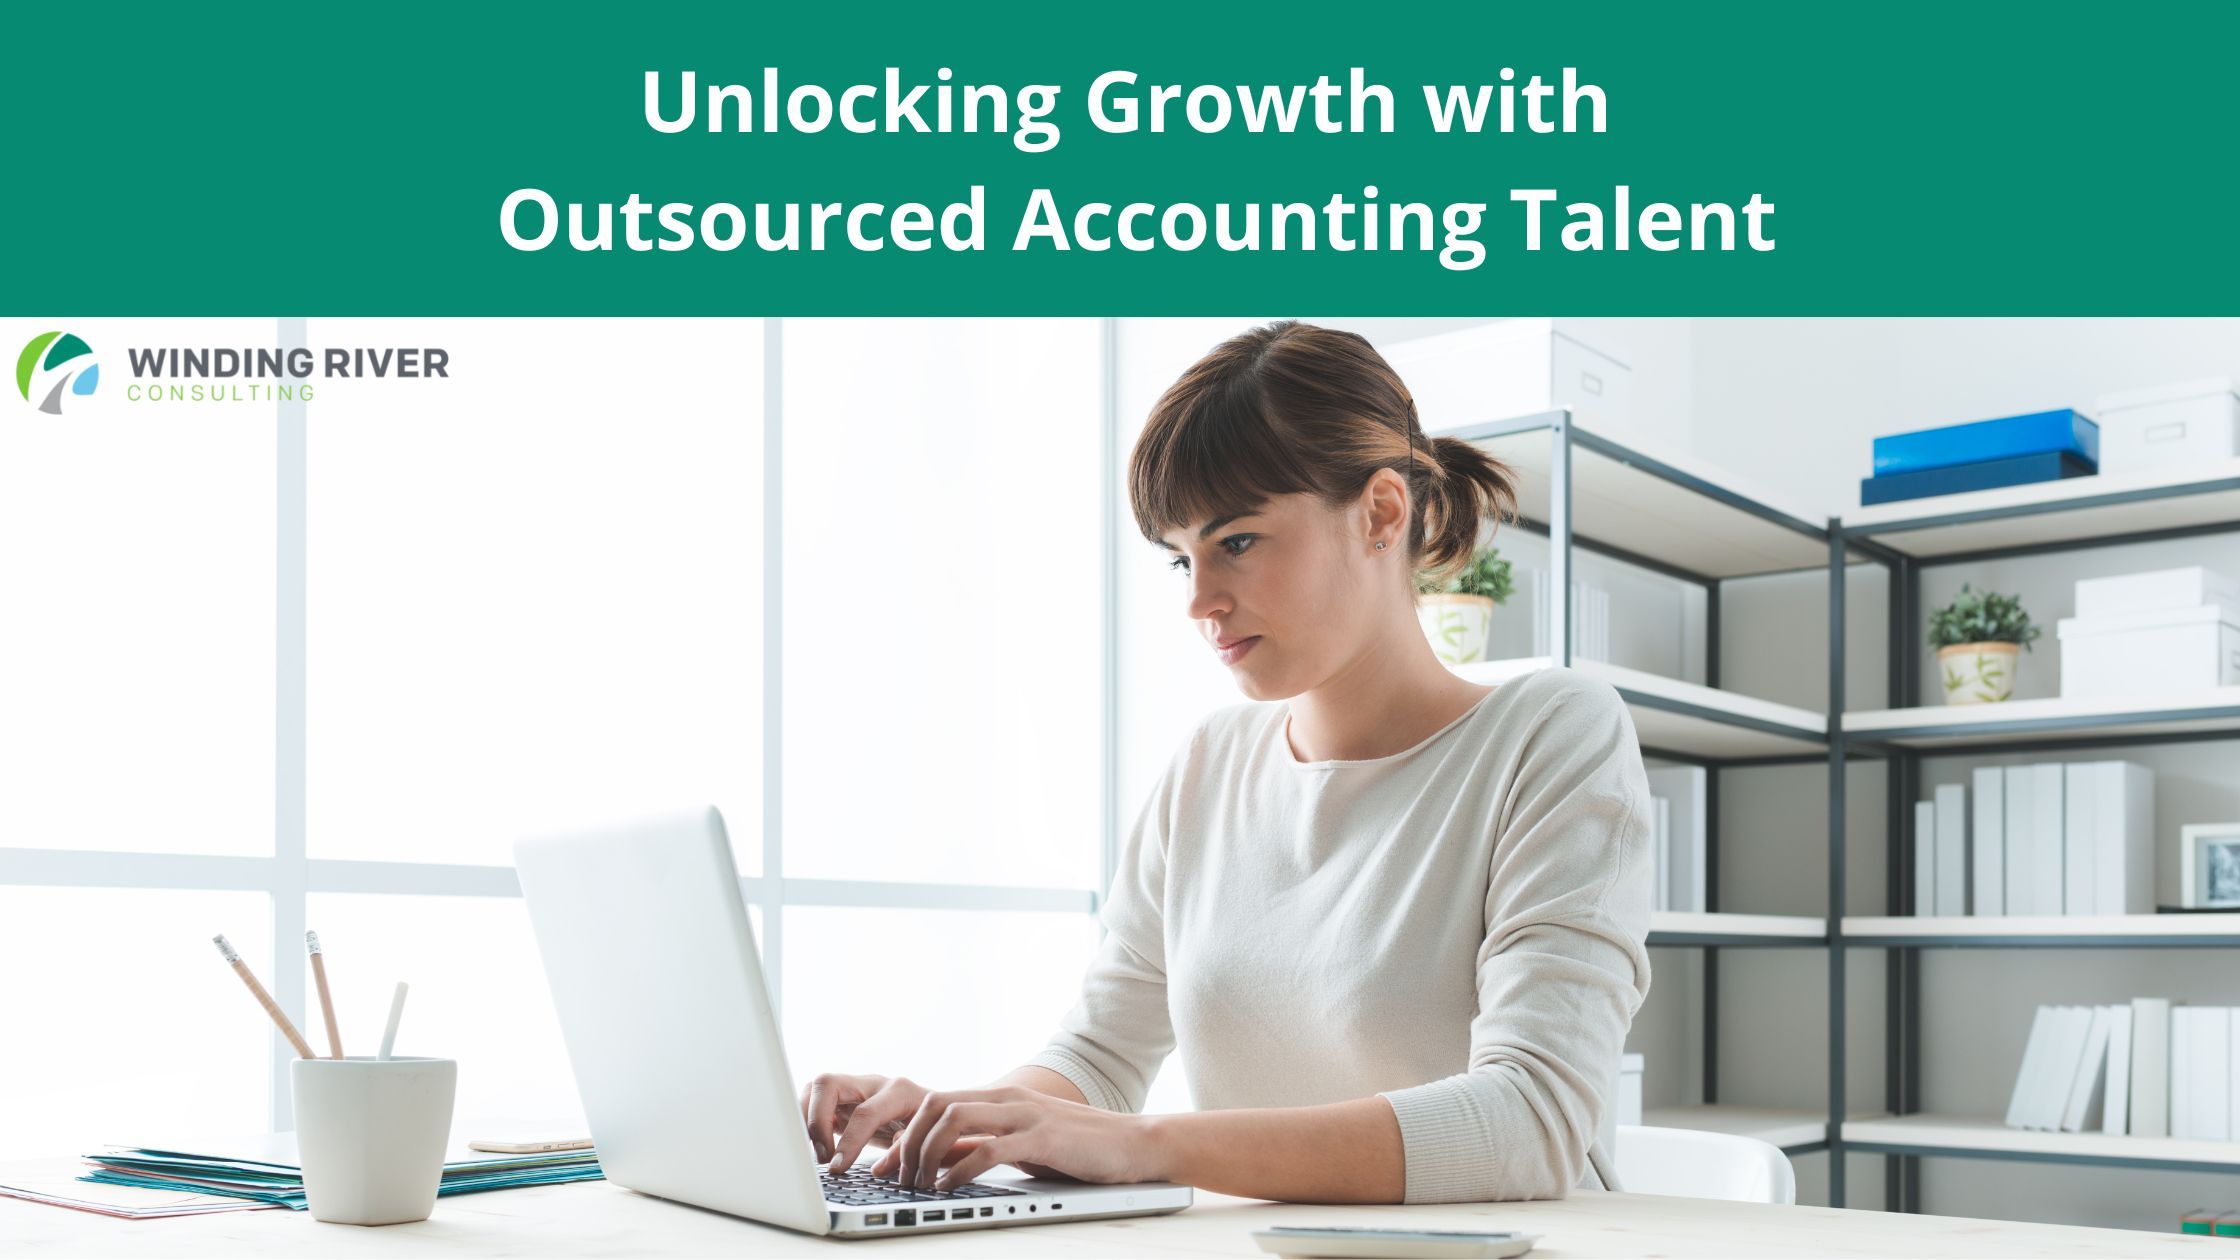 M&A, Private Equity and Unlocking Growth with Outsourced Accounting Talent